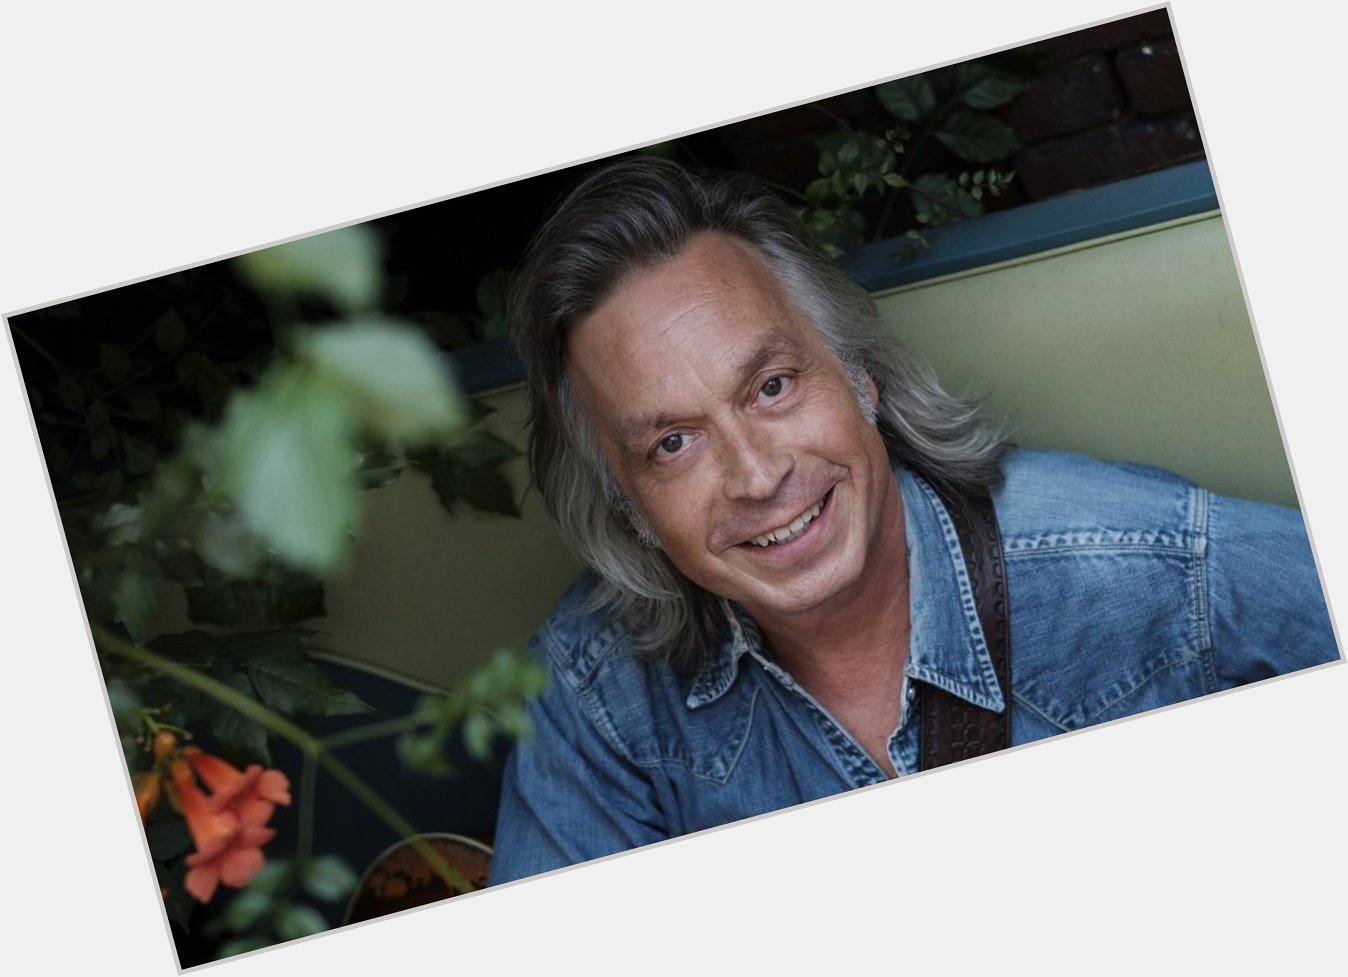 Happy Birthday to Jim Lauderdale who turns 60 today, from all of your friends at Proper Records      